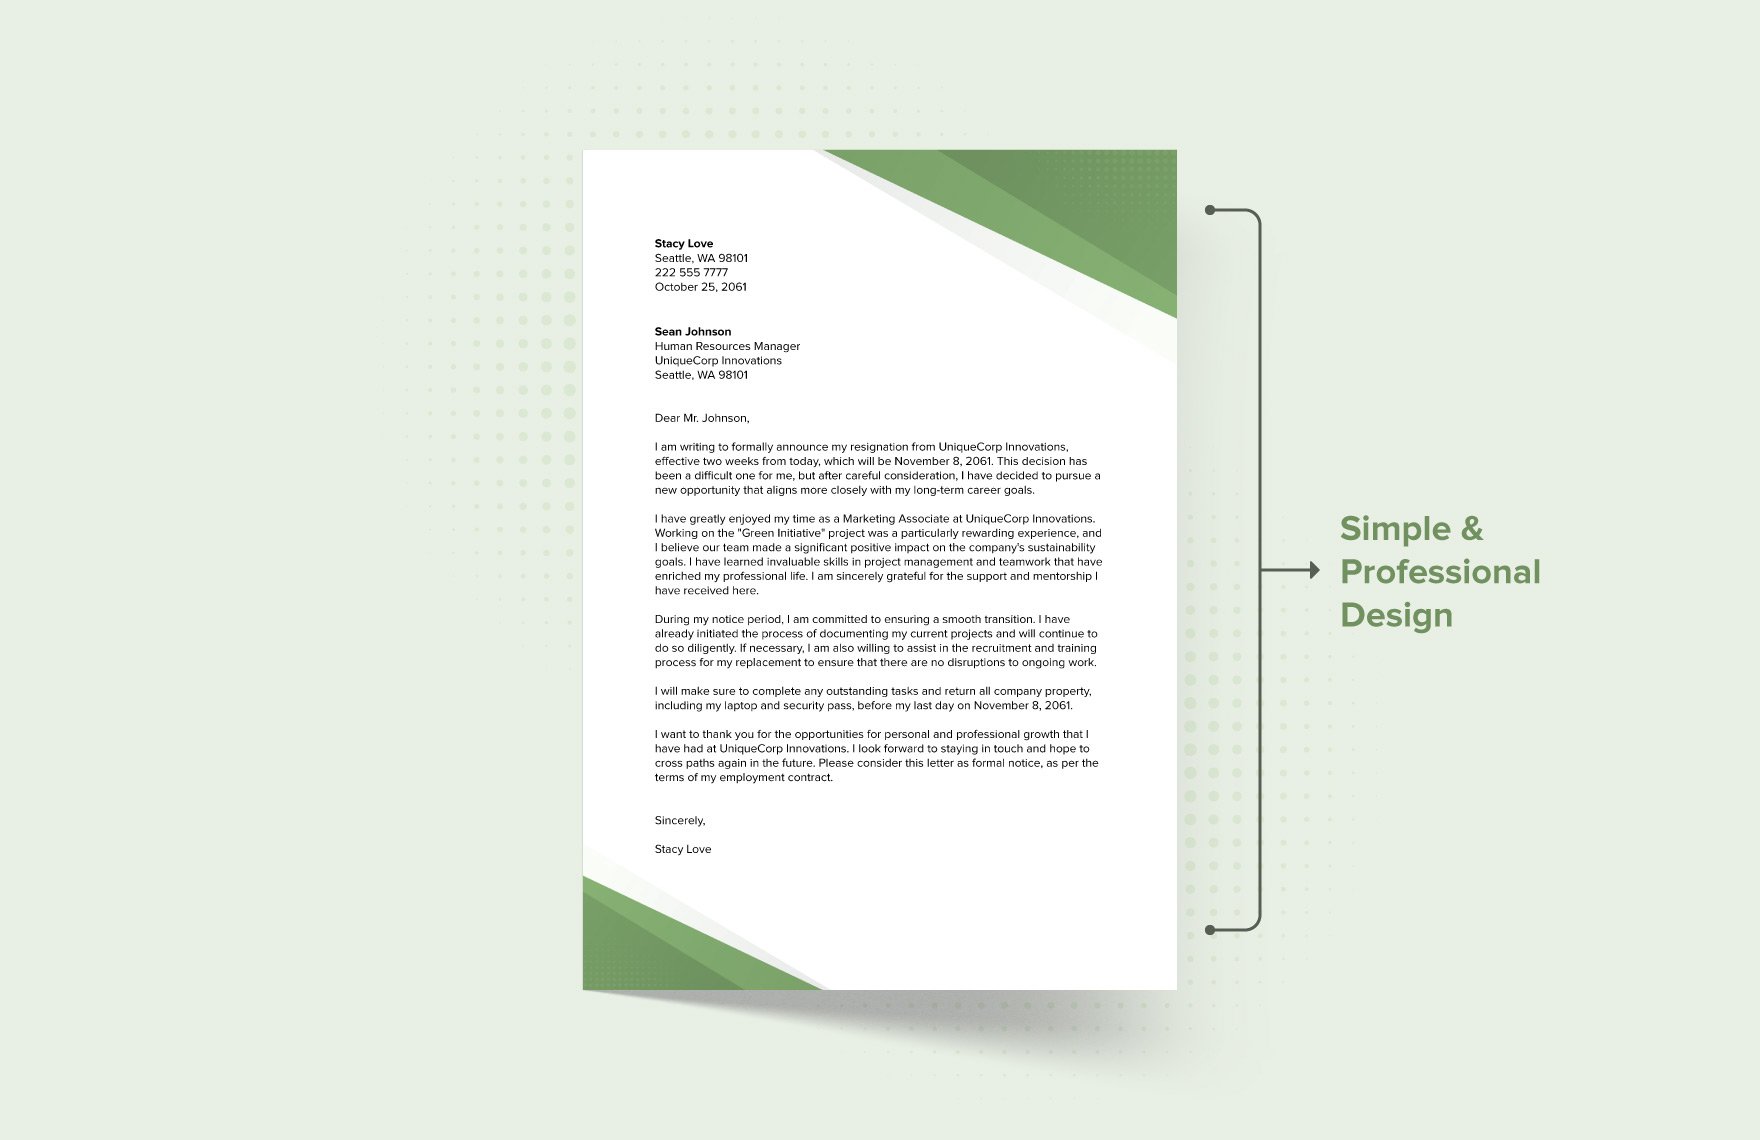 Professional Resignation Letter Template